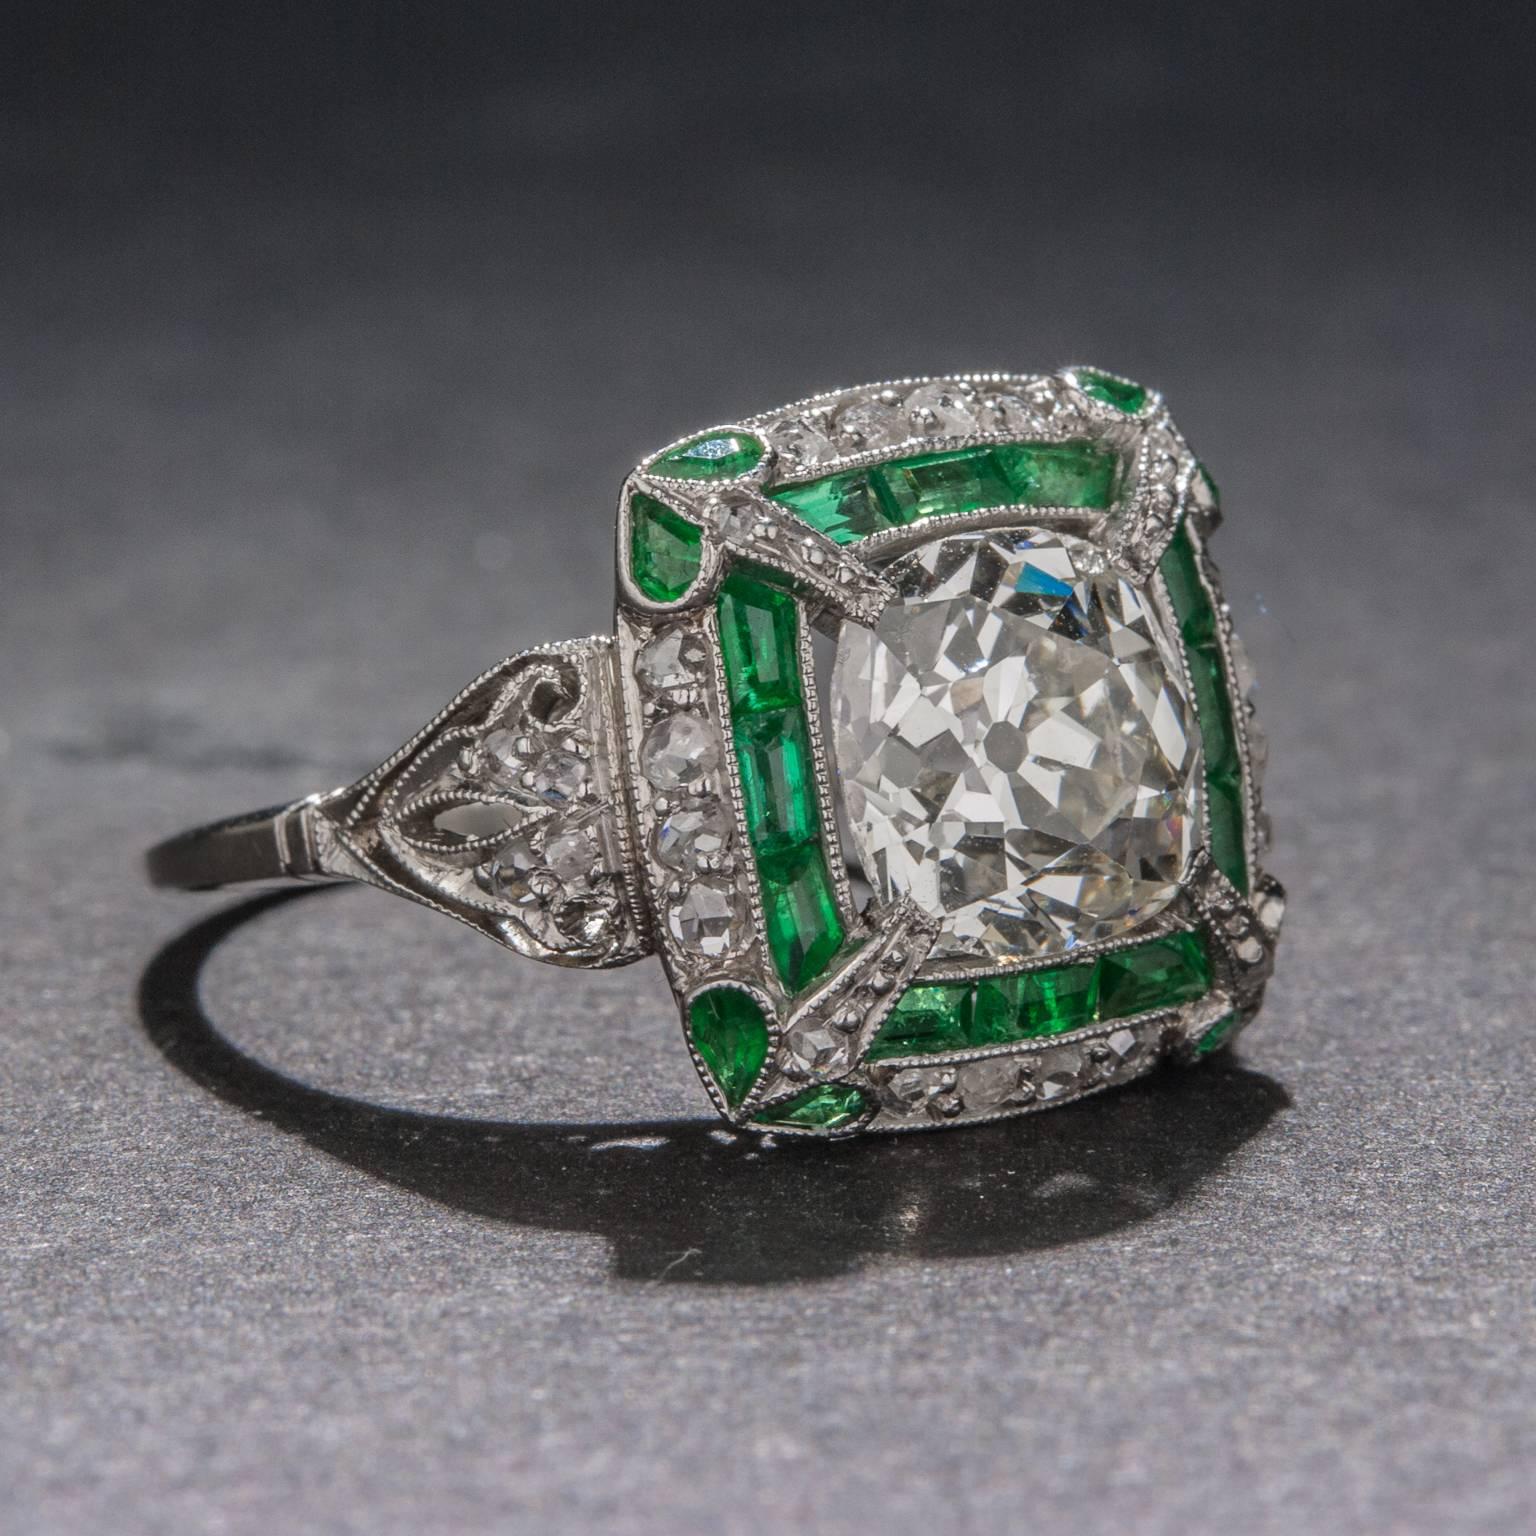 A beautiful Art Deco era ring with a 2.50 carat Old European Cut diamond at its center. The center diamond is complemented by .85 total carats of emerald and an additional .50 total carats of diamond. The ring is crafted in platinum and features